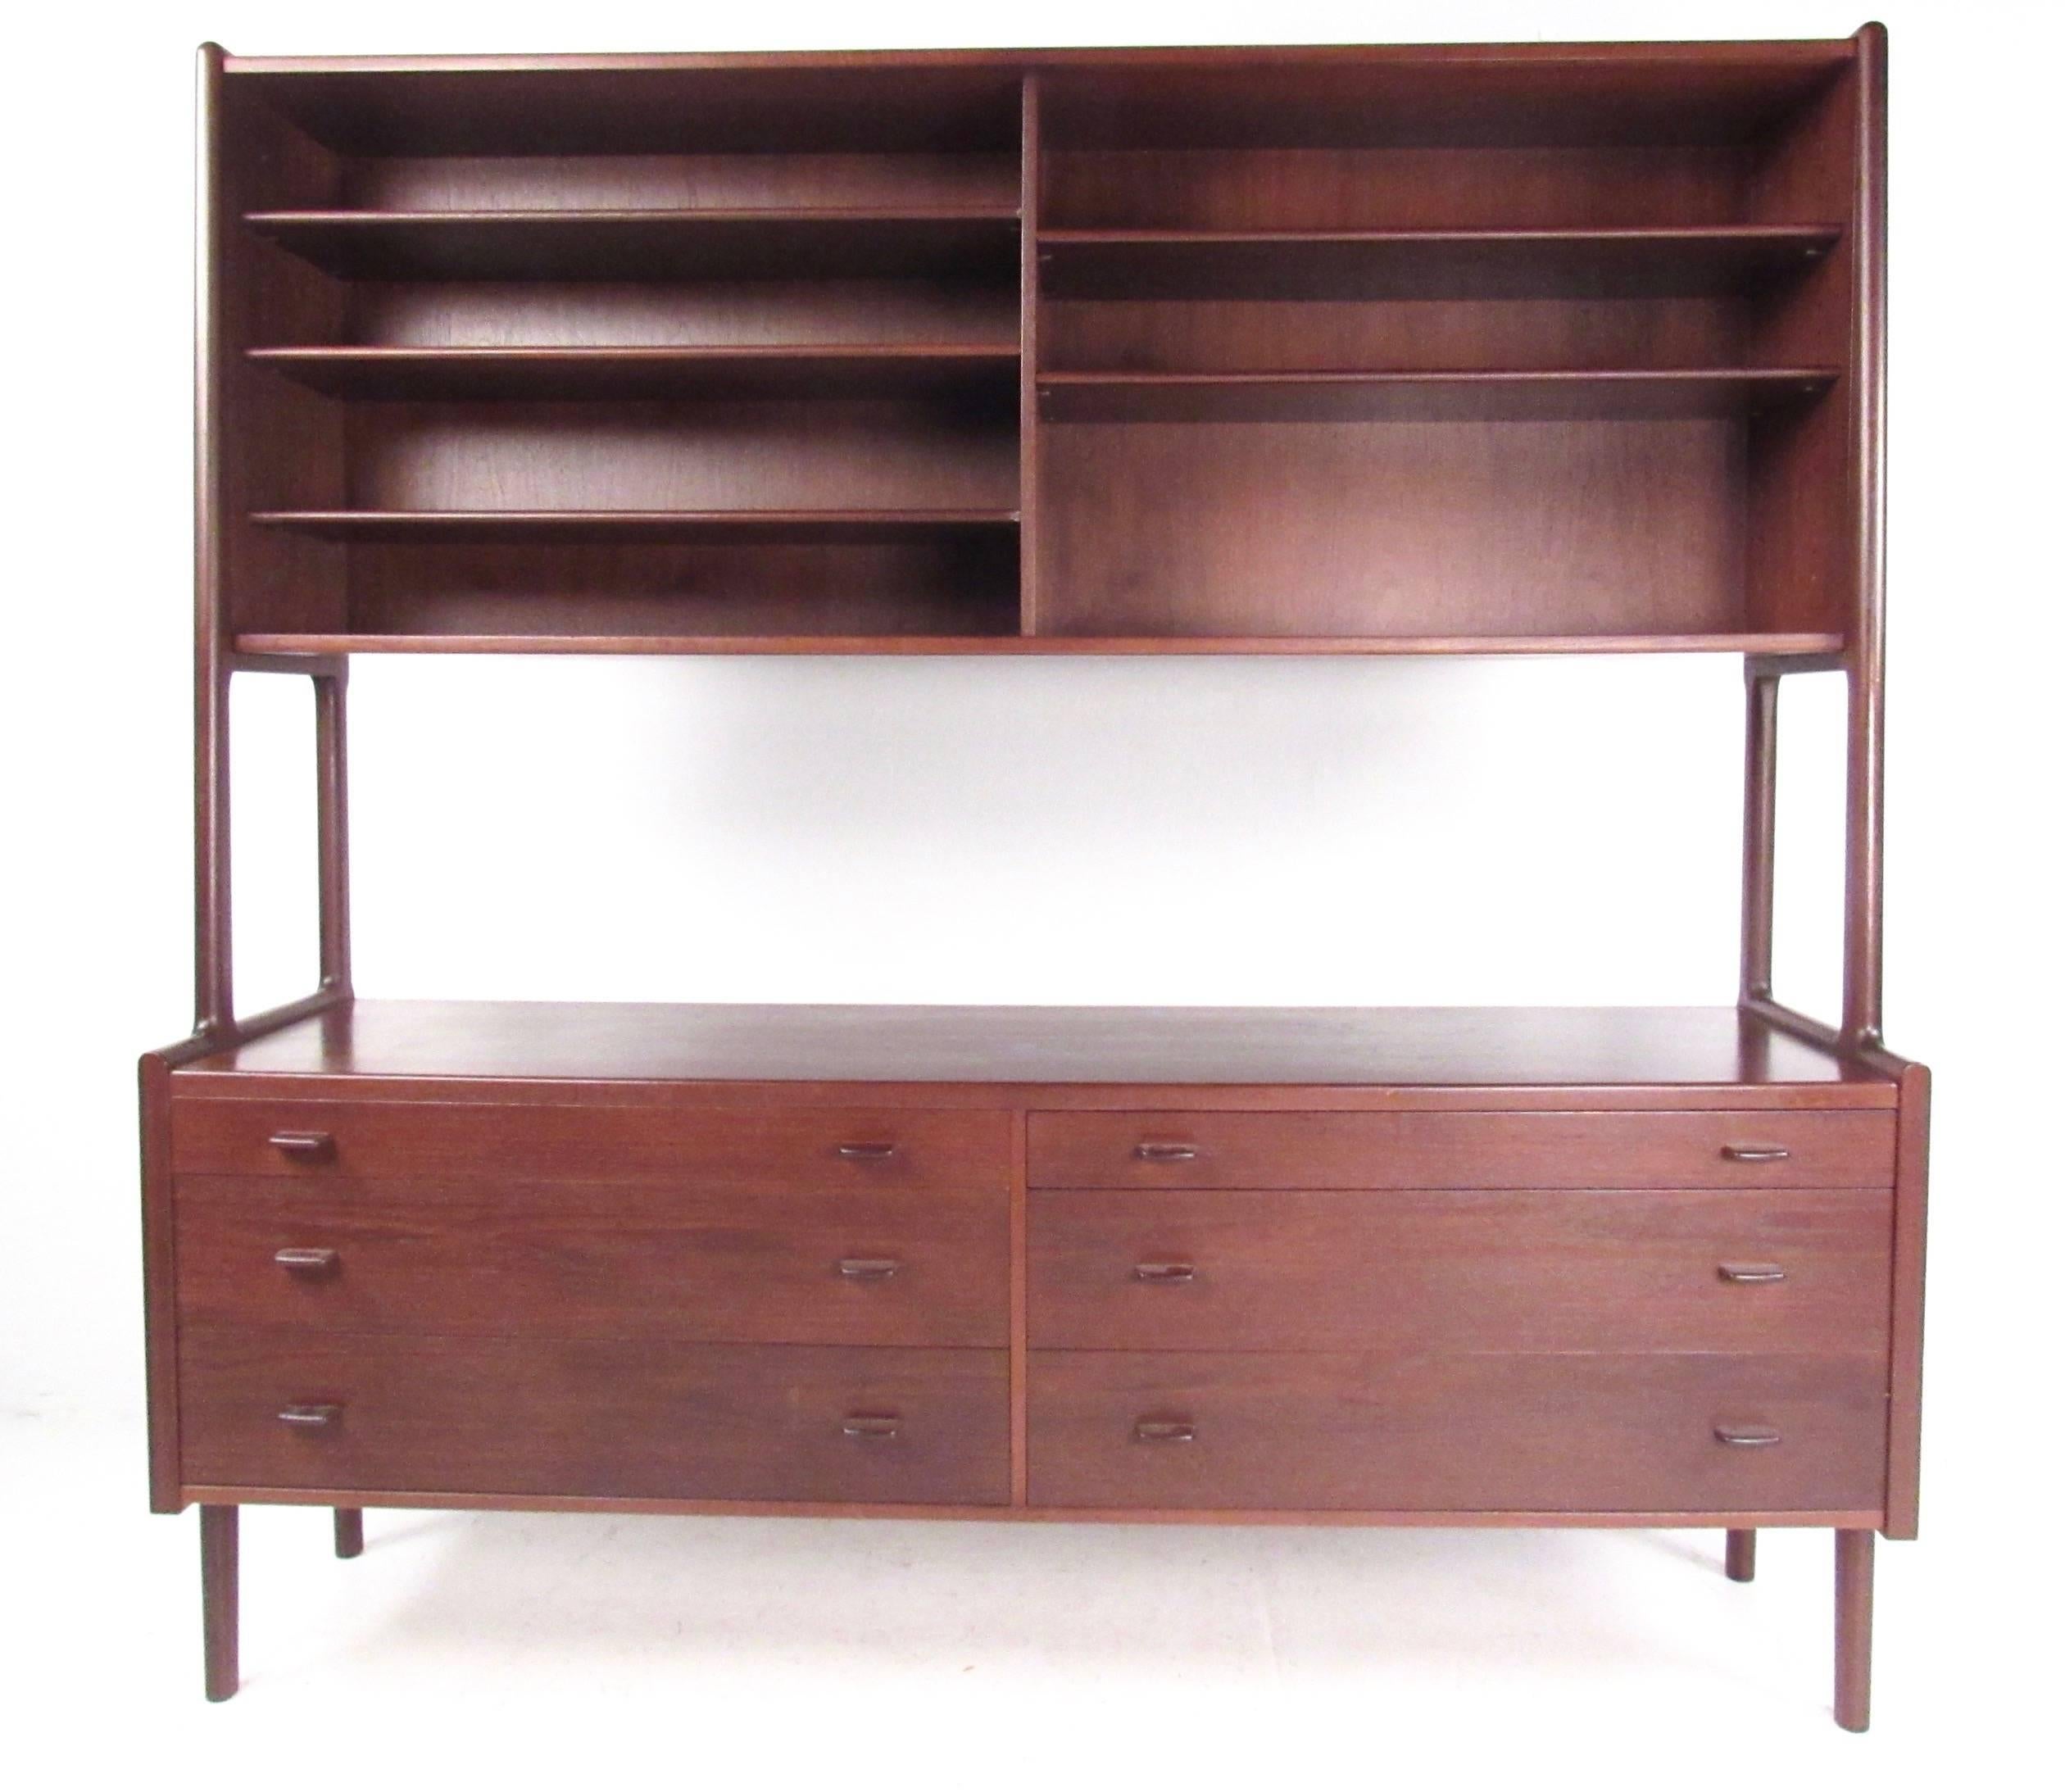 This vintage modern two-tier sideboard by Hans Wegner features a rich teak finish with carved wooden handles. This impressive Mid-Century sideboard combines open storage with graduated drawers for concealed storage. Top cabinet features sliding